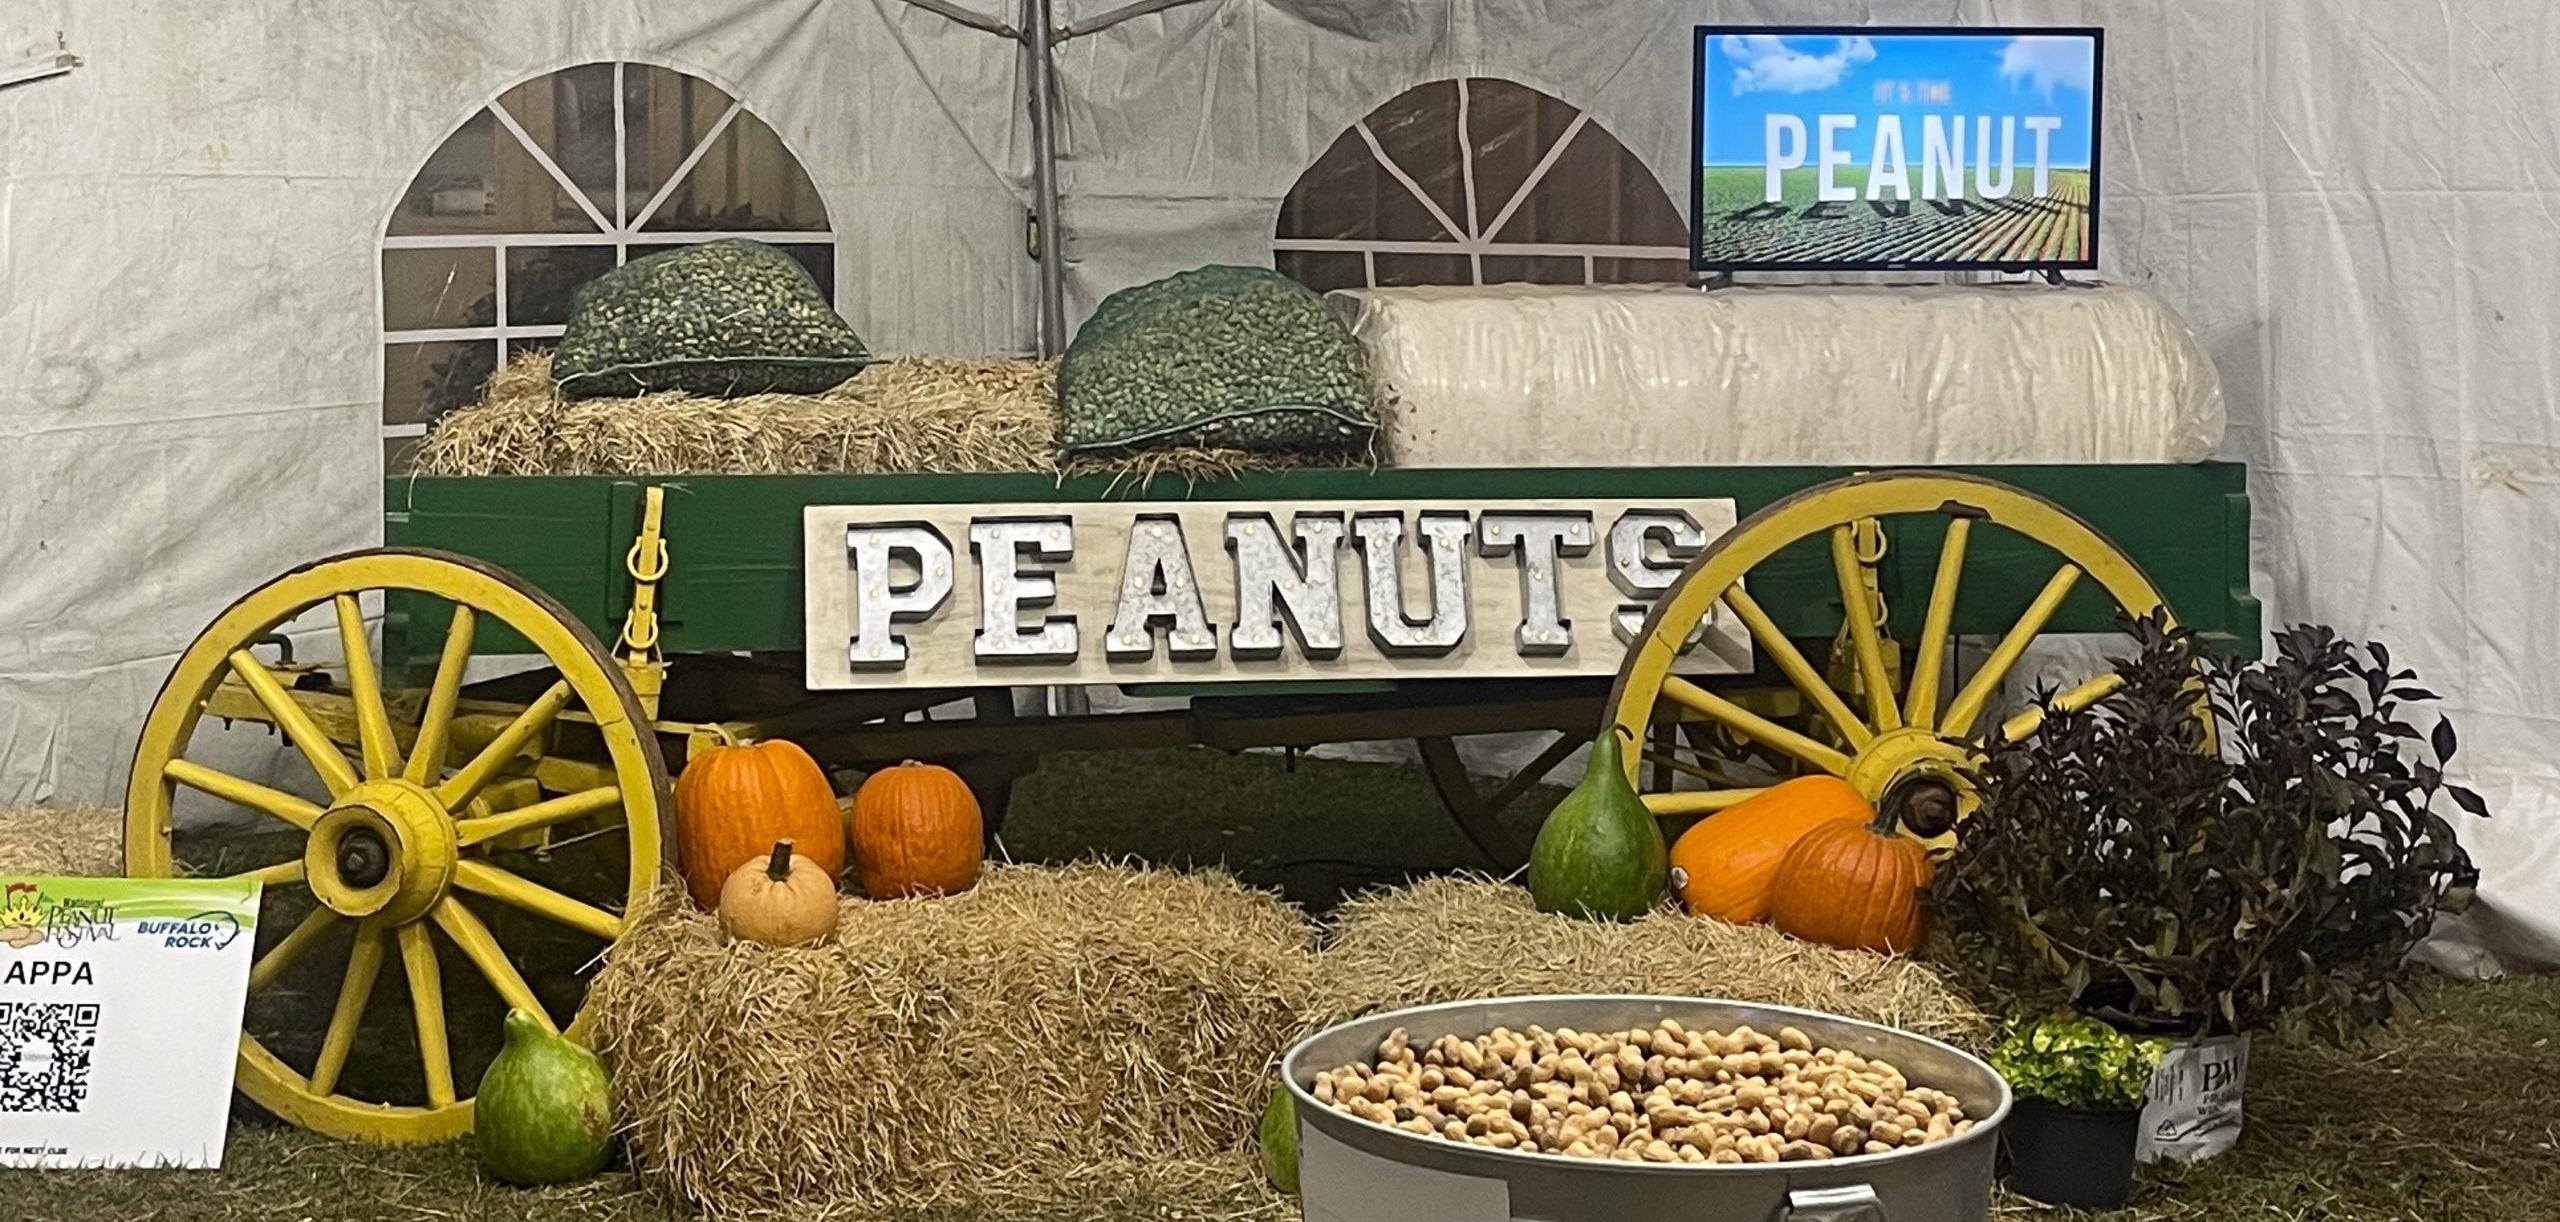 APPA Shares the Comfort of Peanuts at the 2023 National Peanut Festival